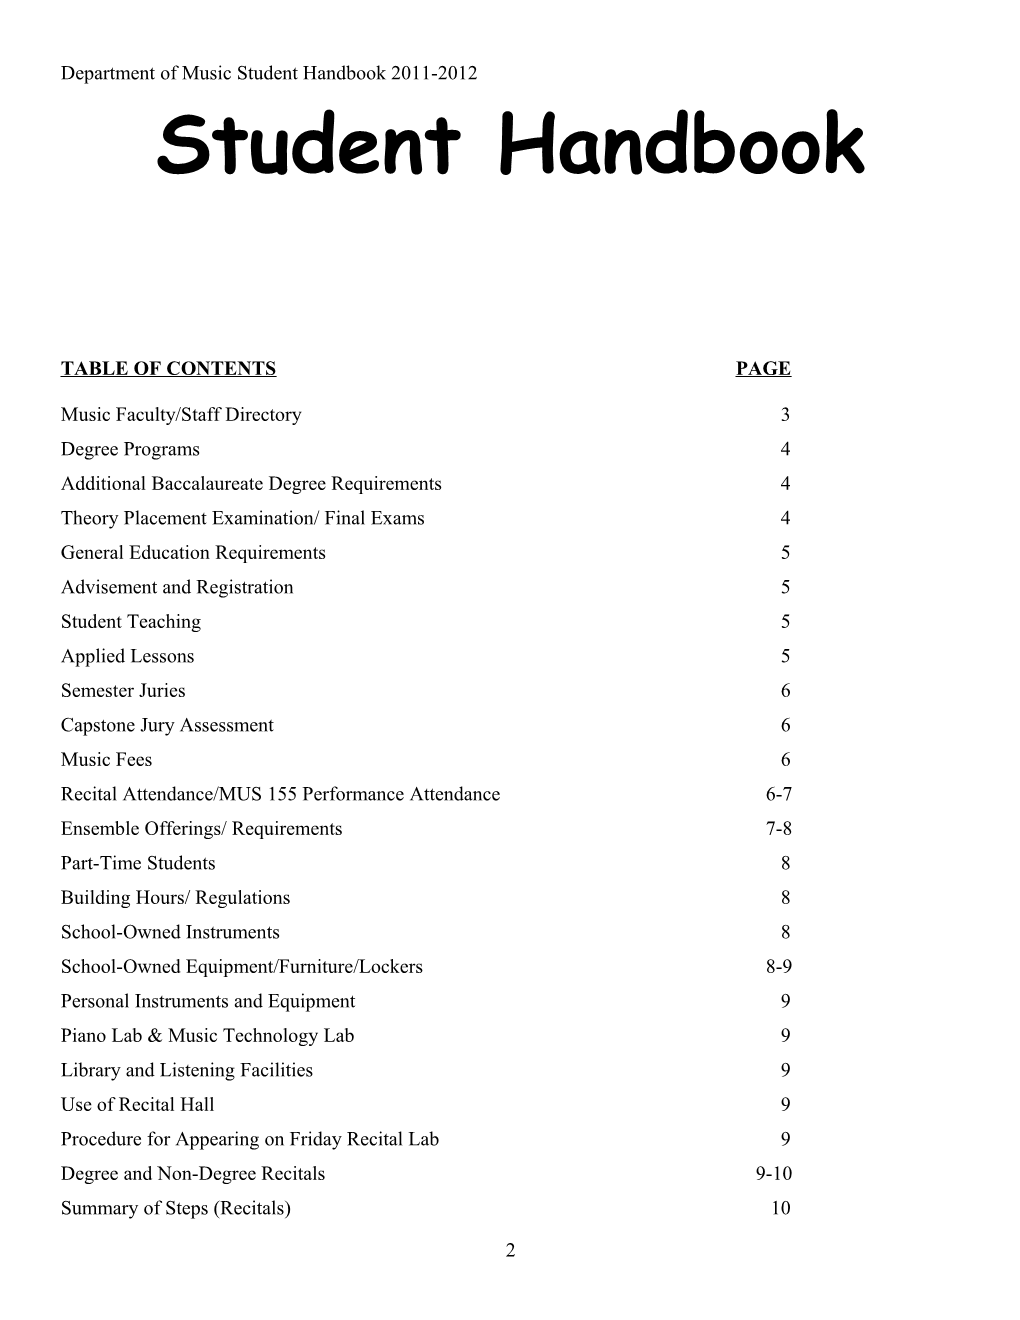 Table of Contents s502